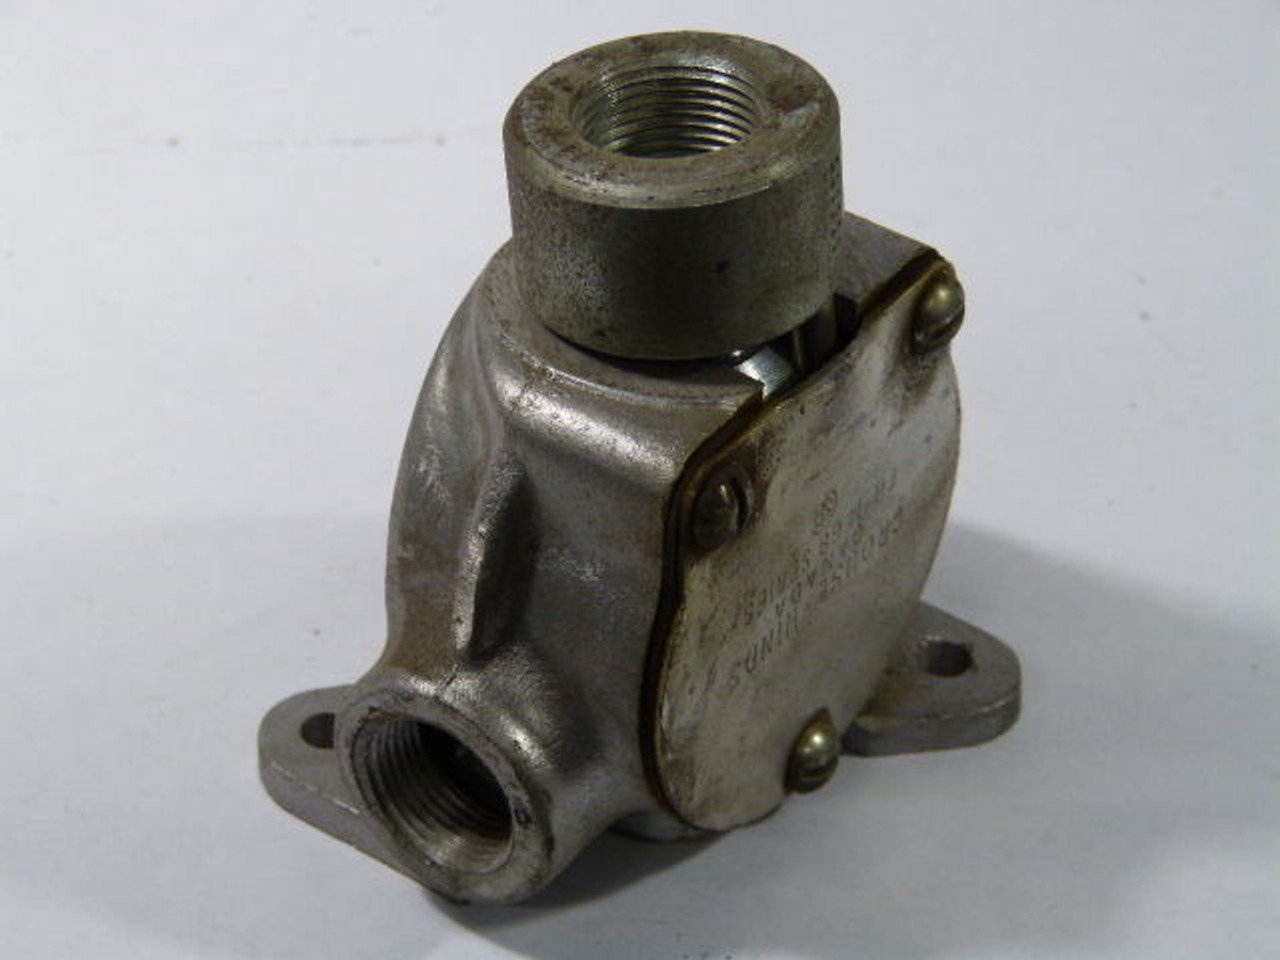 Crouse-Hinds FH-M68 Conduit Outlet Junction Body USED